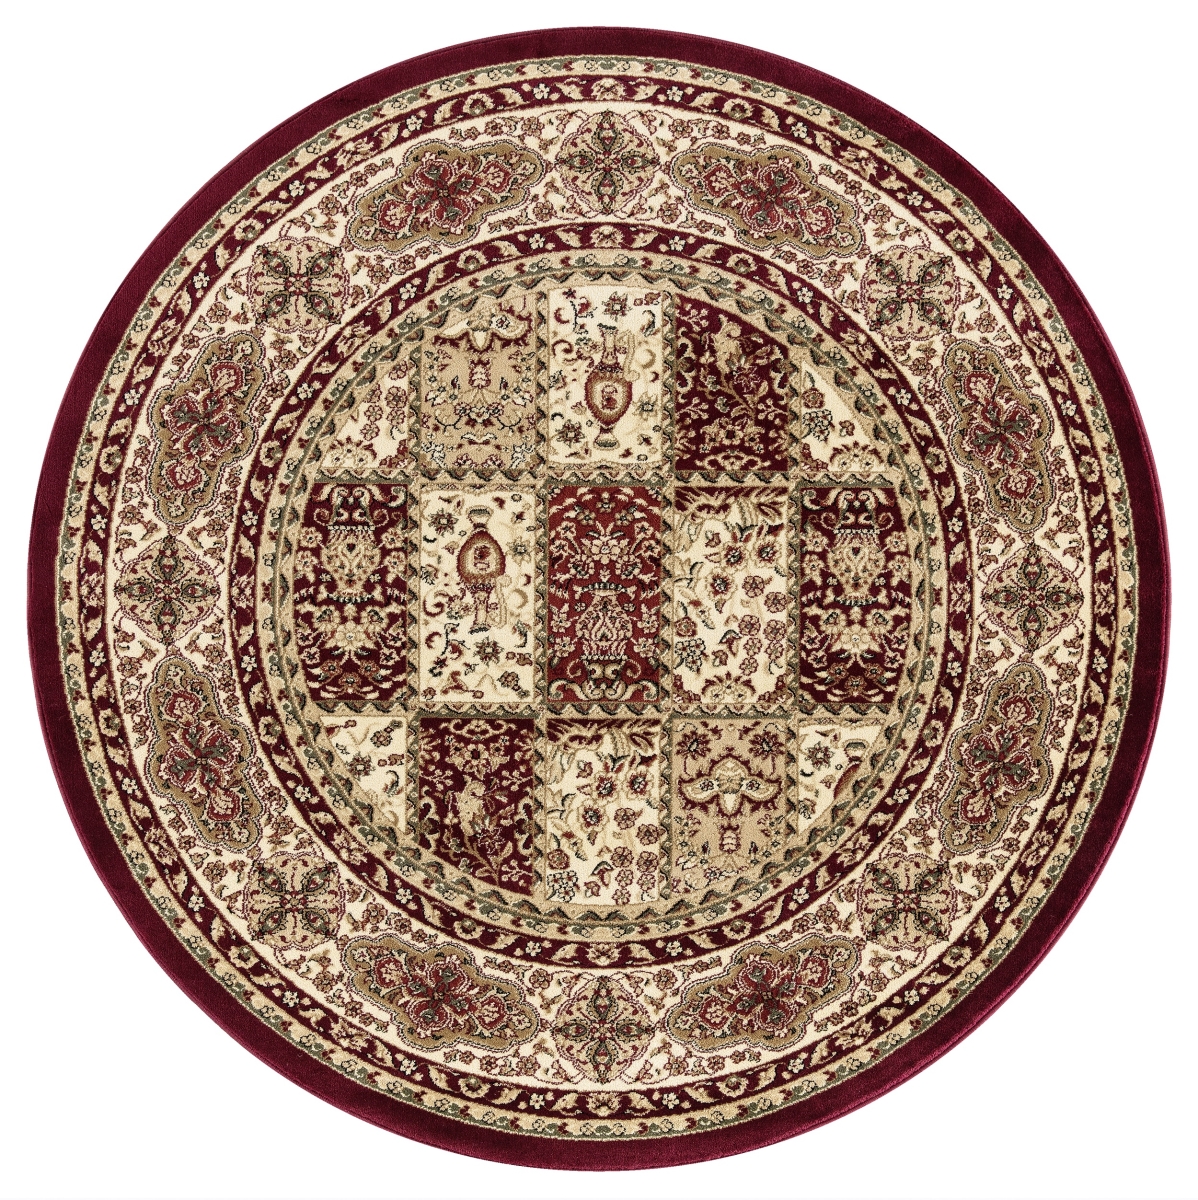 C483.04.rd.8r 8 Ft. Classic Baykal Traditional & Oriental Rug, Red & Cream